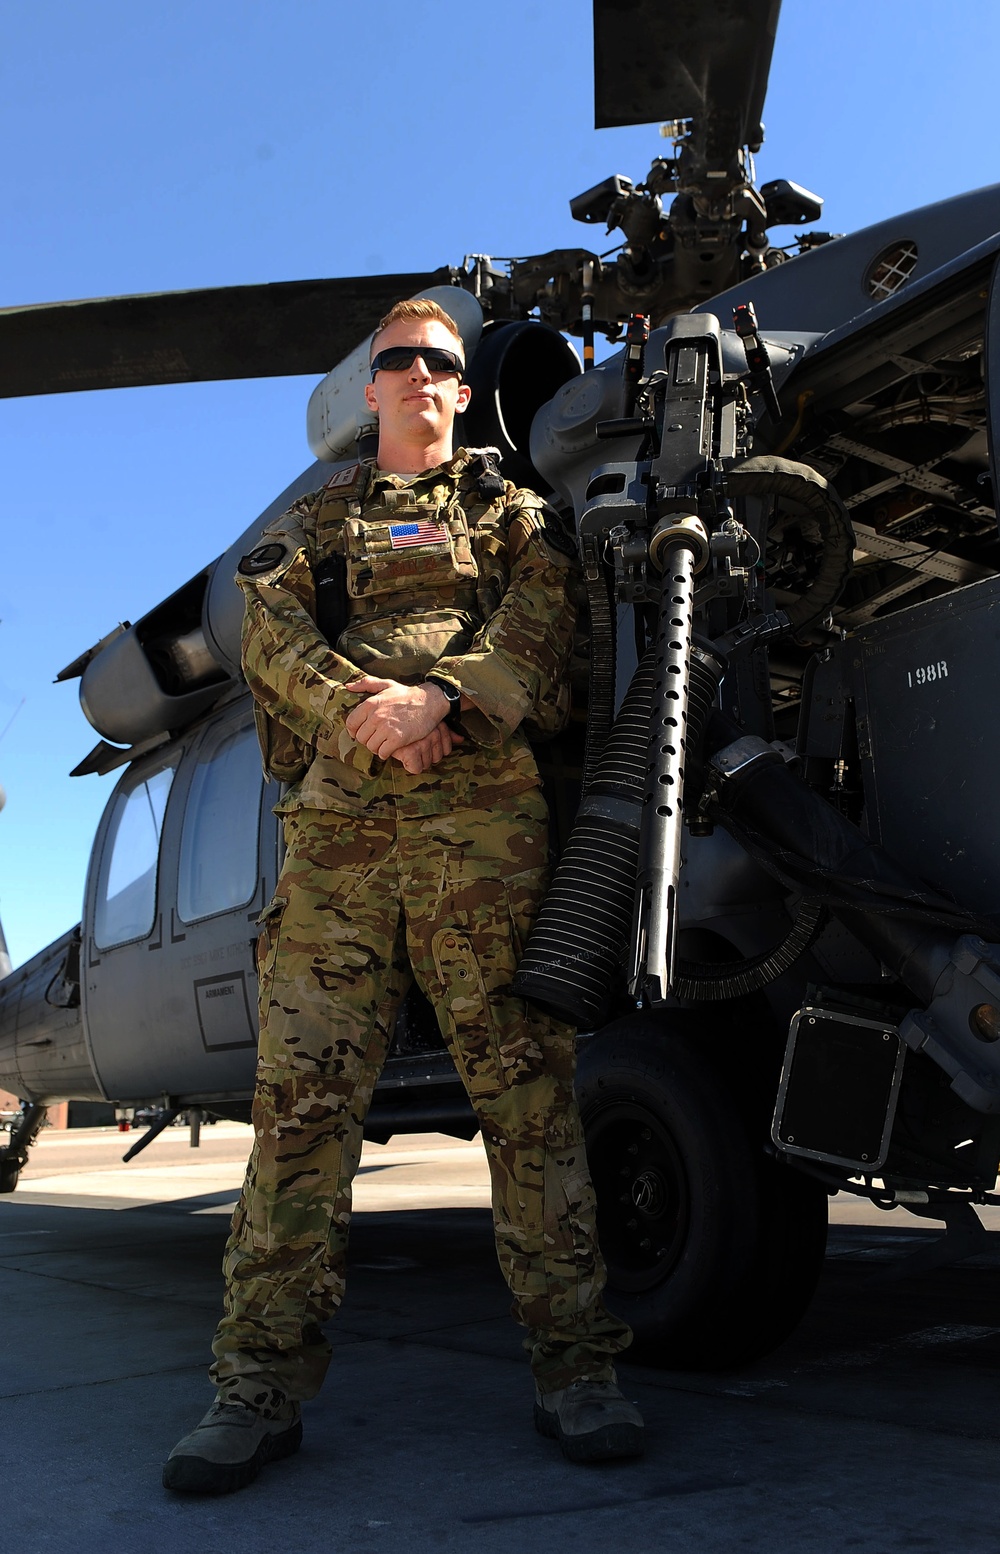 Special mission aviator earns coveted award